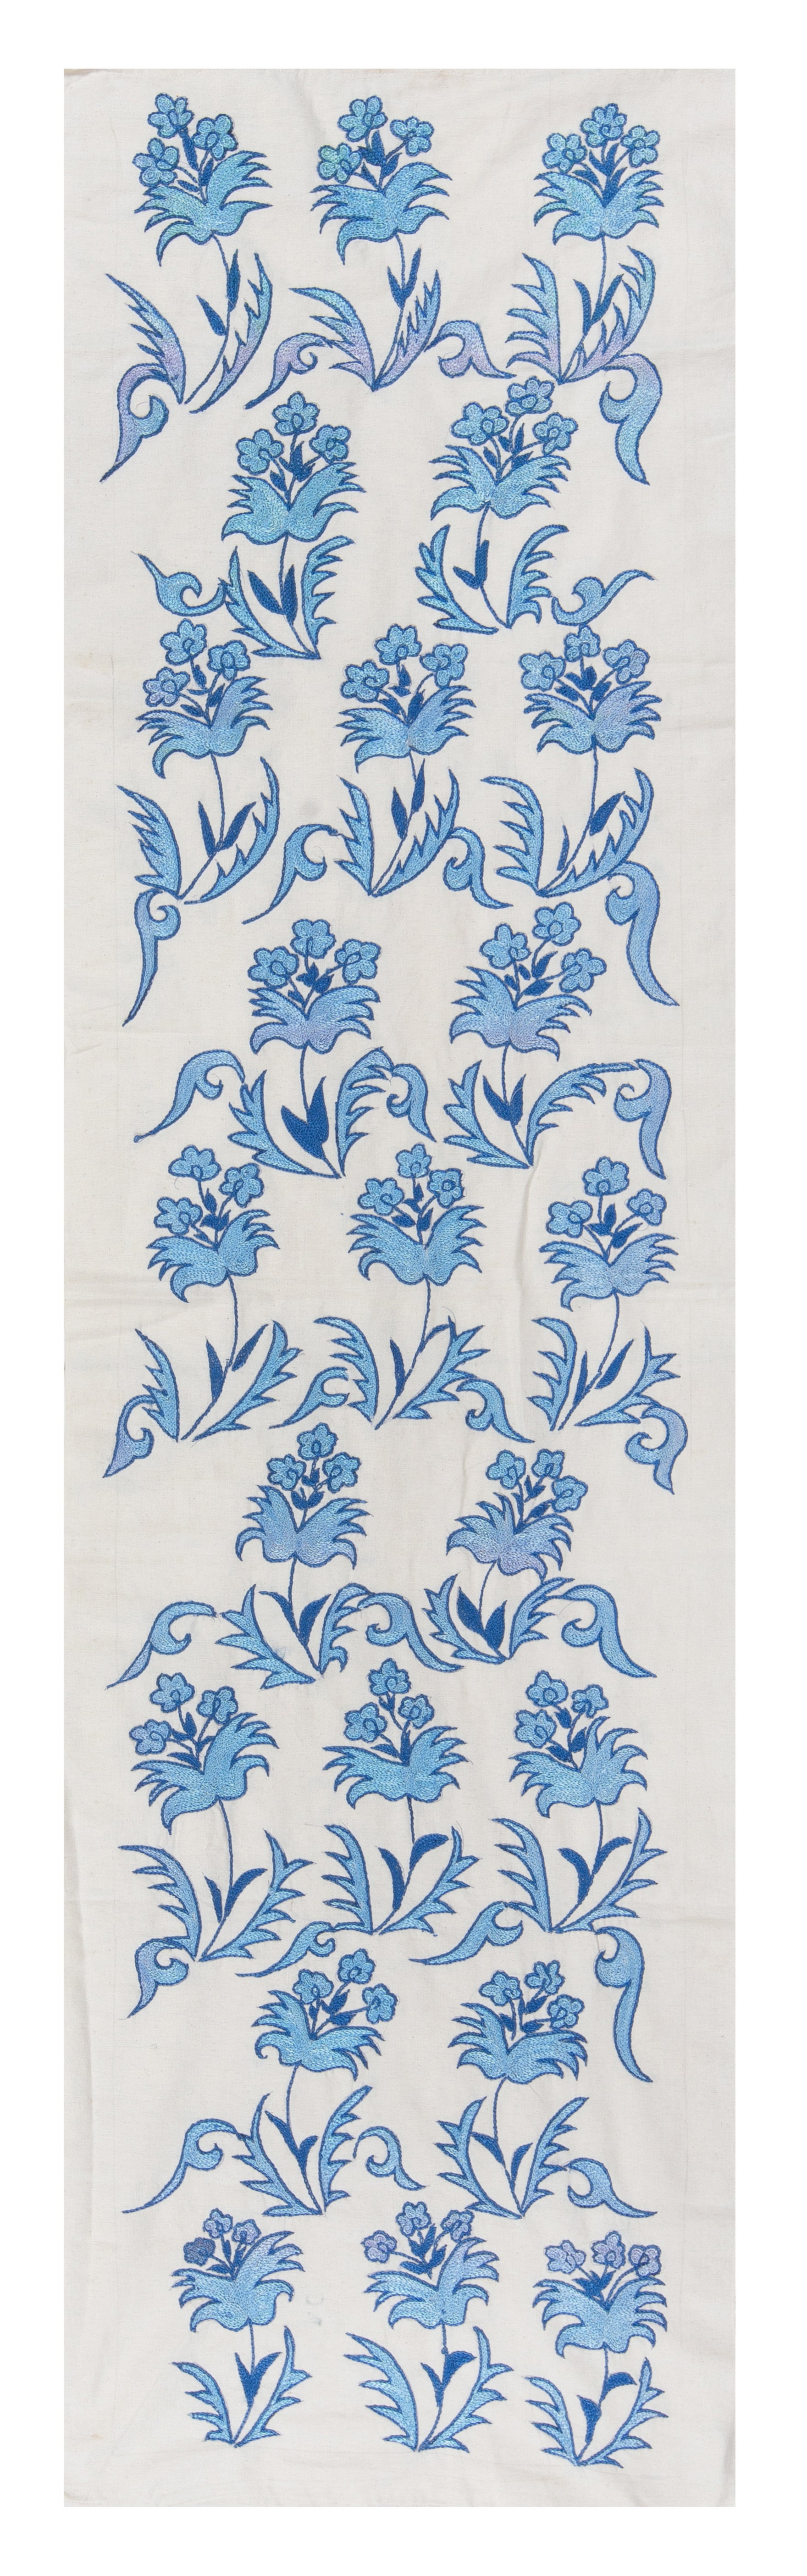 1.7x6.3 Ft Floral Suzani Table Runner, Embroidered Cotton & Silk Wall Hanging For Sale